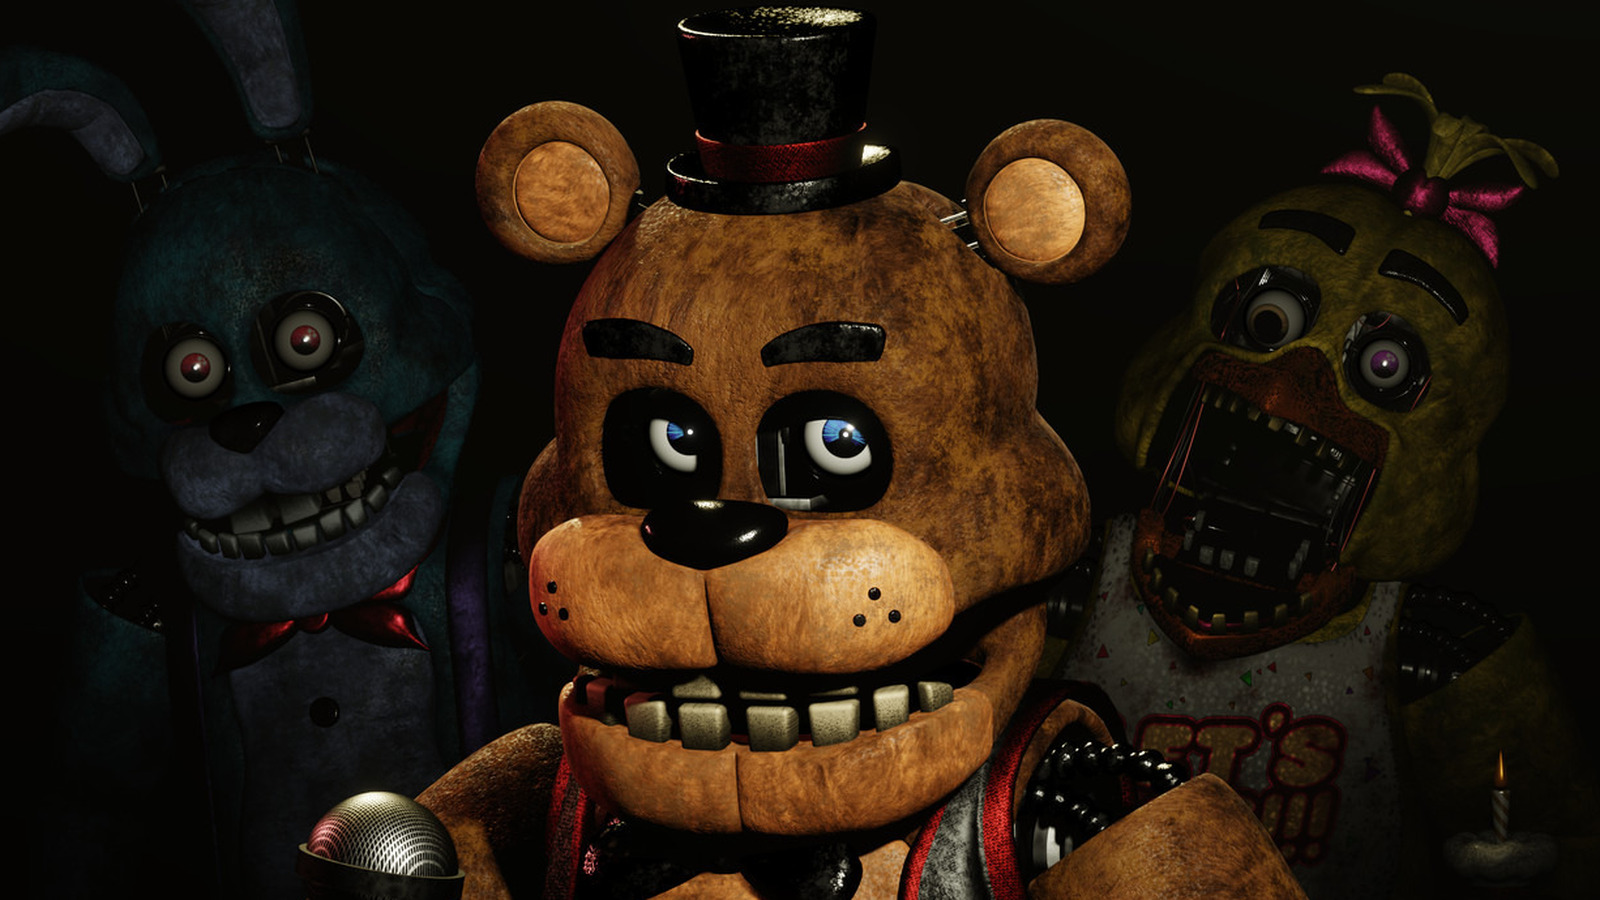 Five Nights At Freddy's becomes a beat 'em up